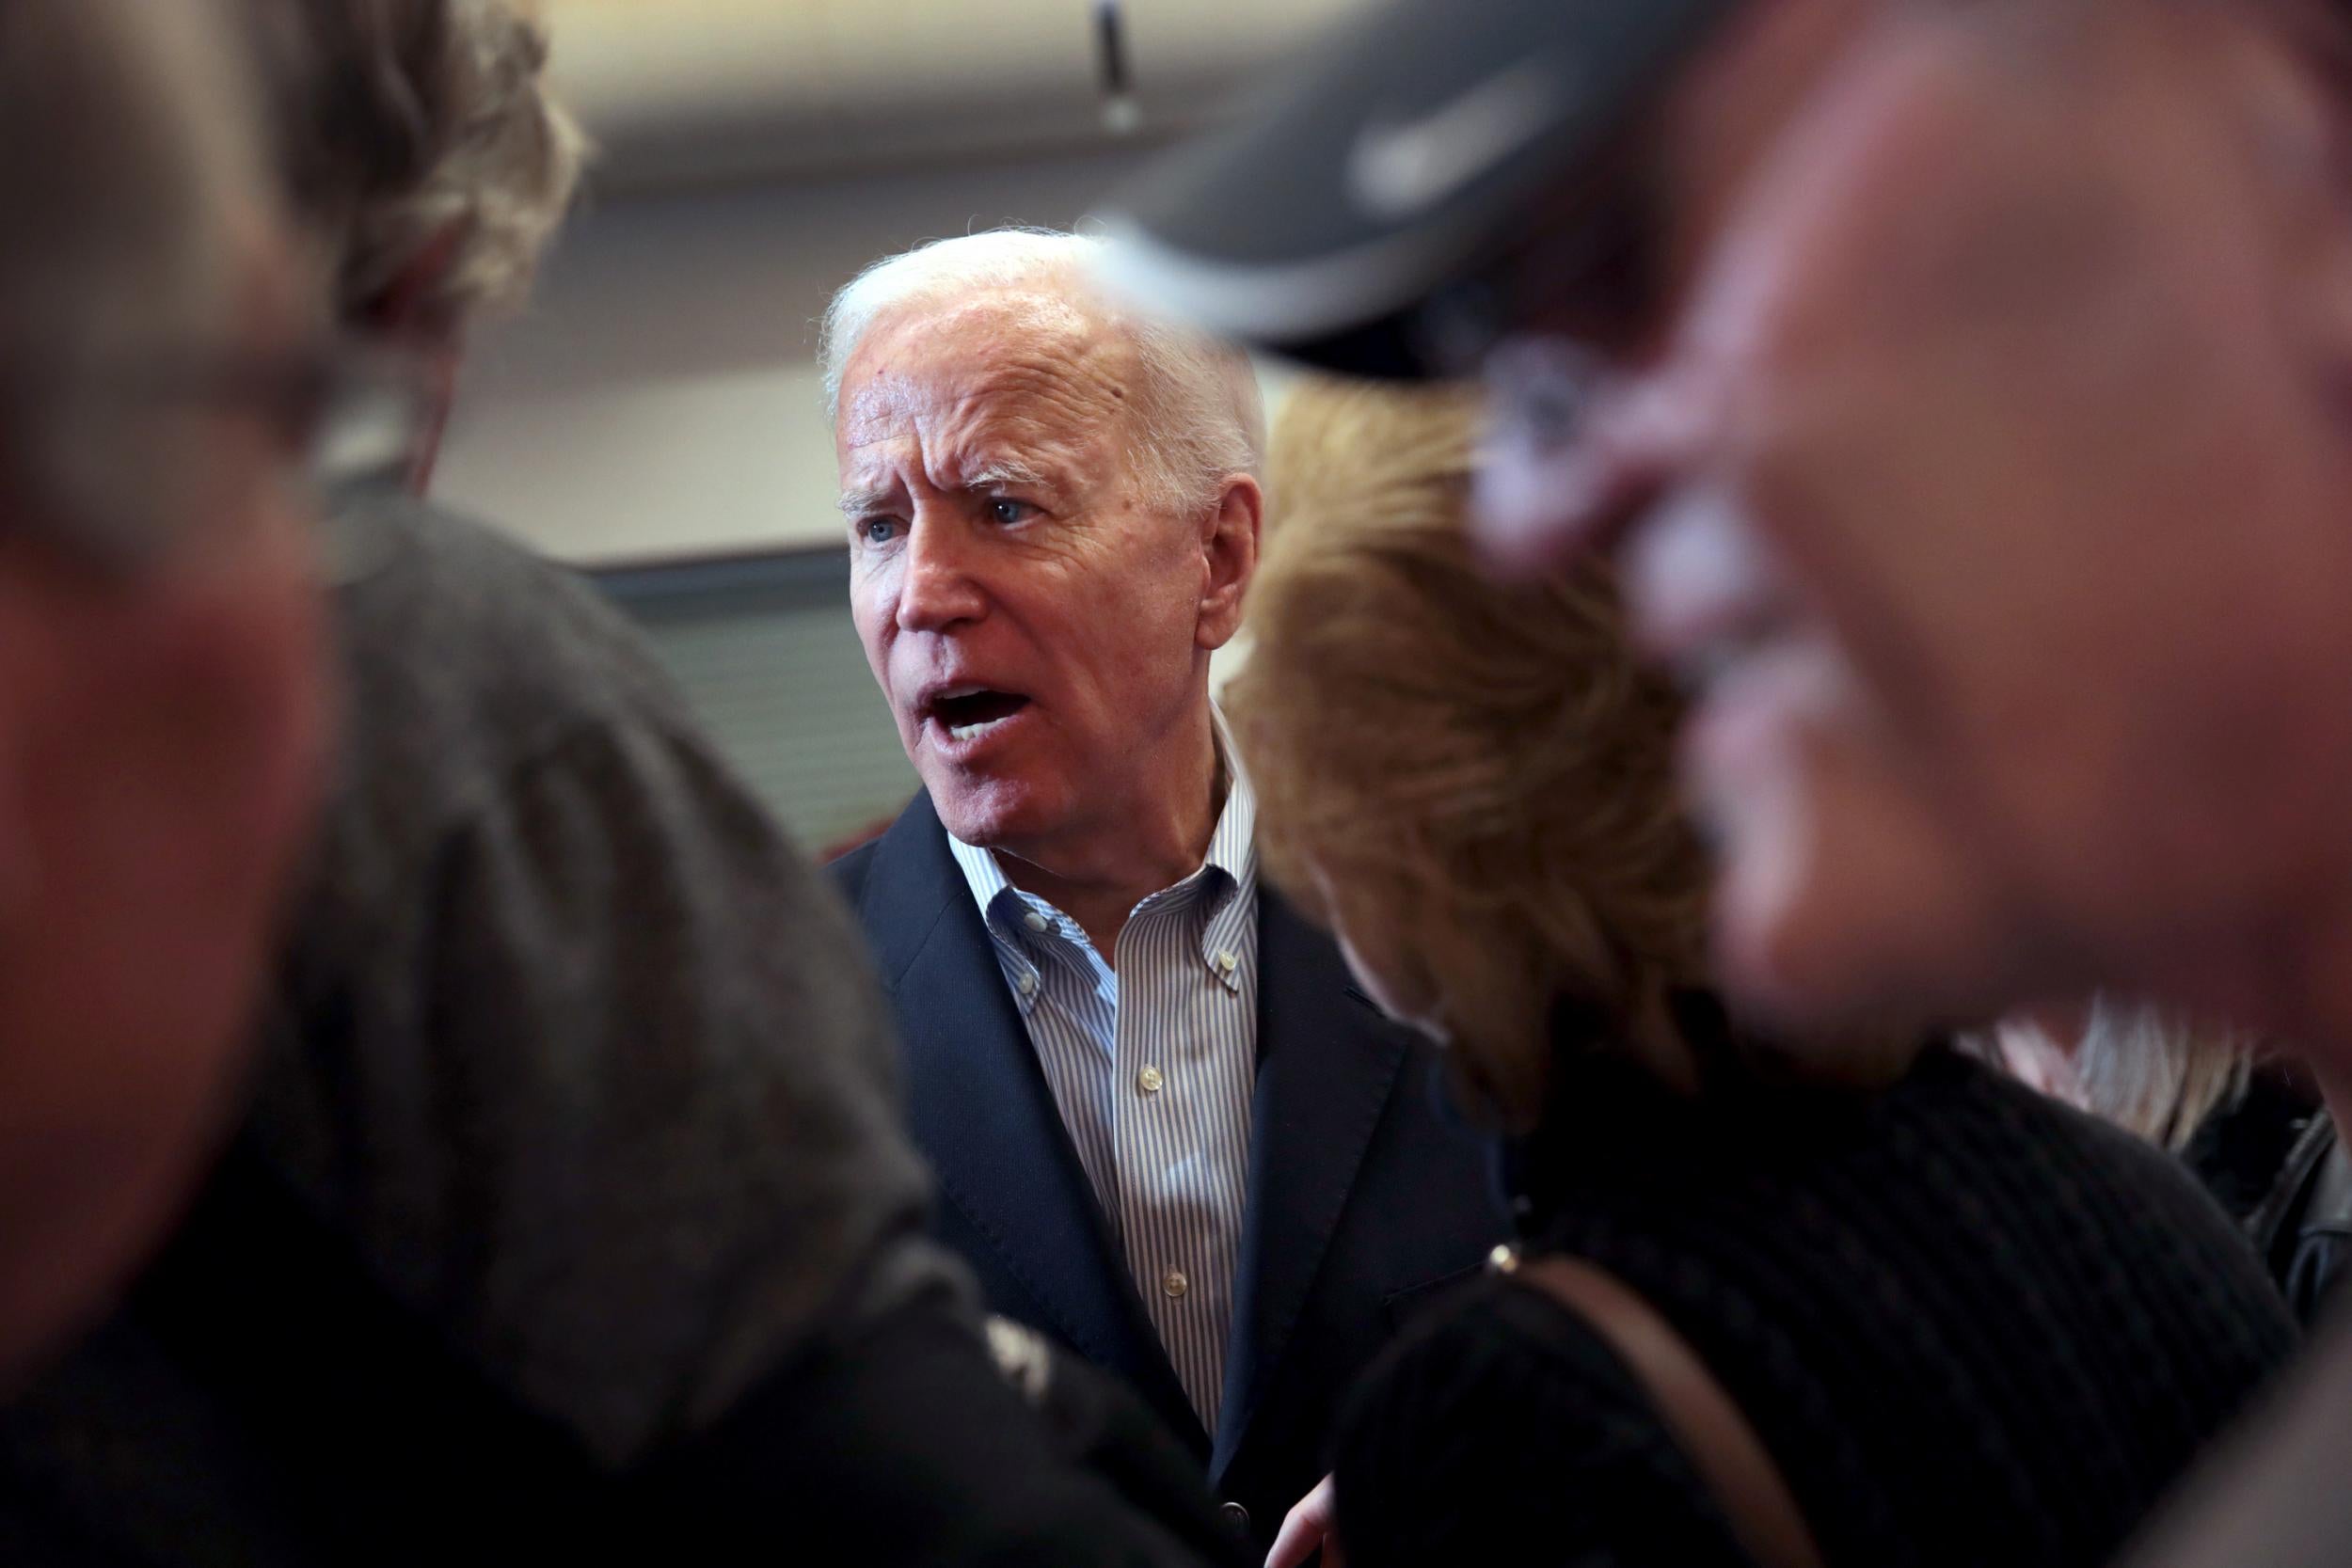 'You're a damn liar, man': Biden shoots down voter's Ukraine theory, challenges him to pushups and IQ test